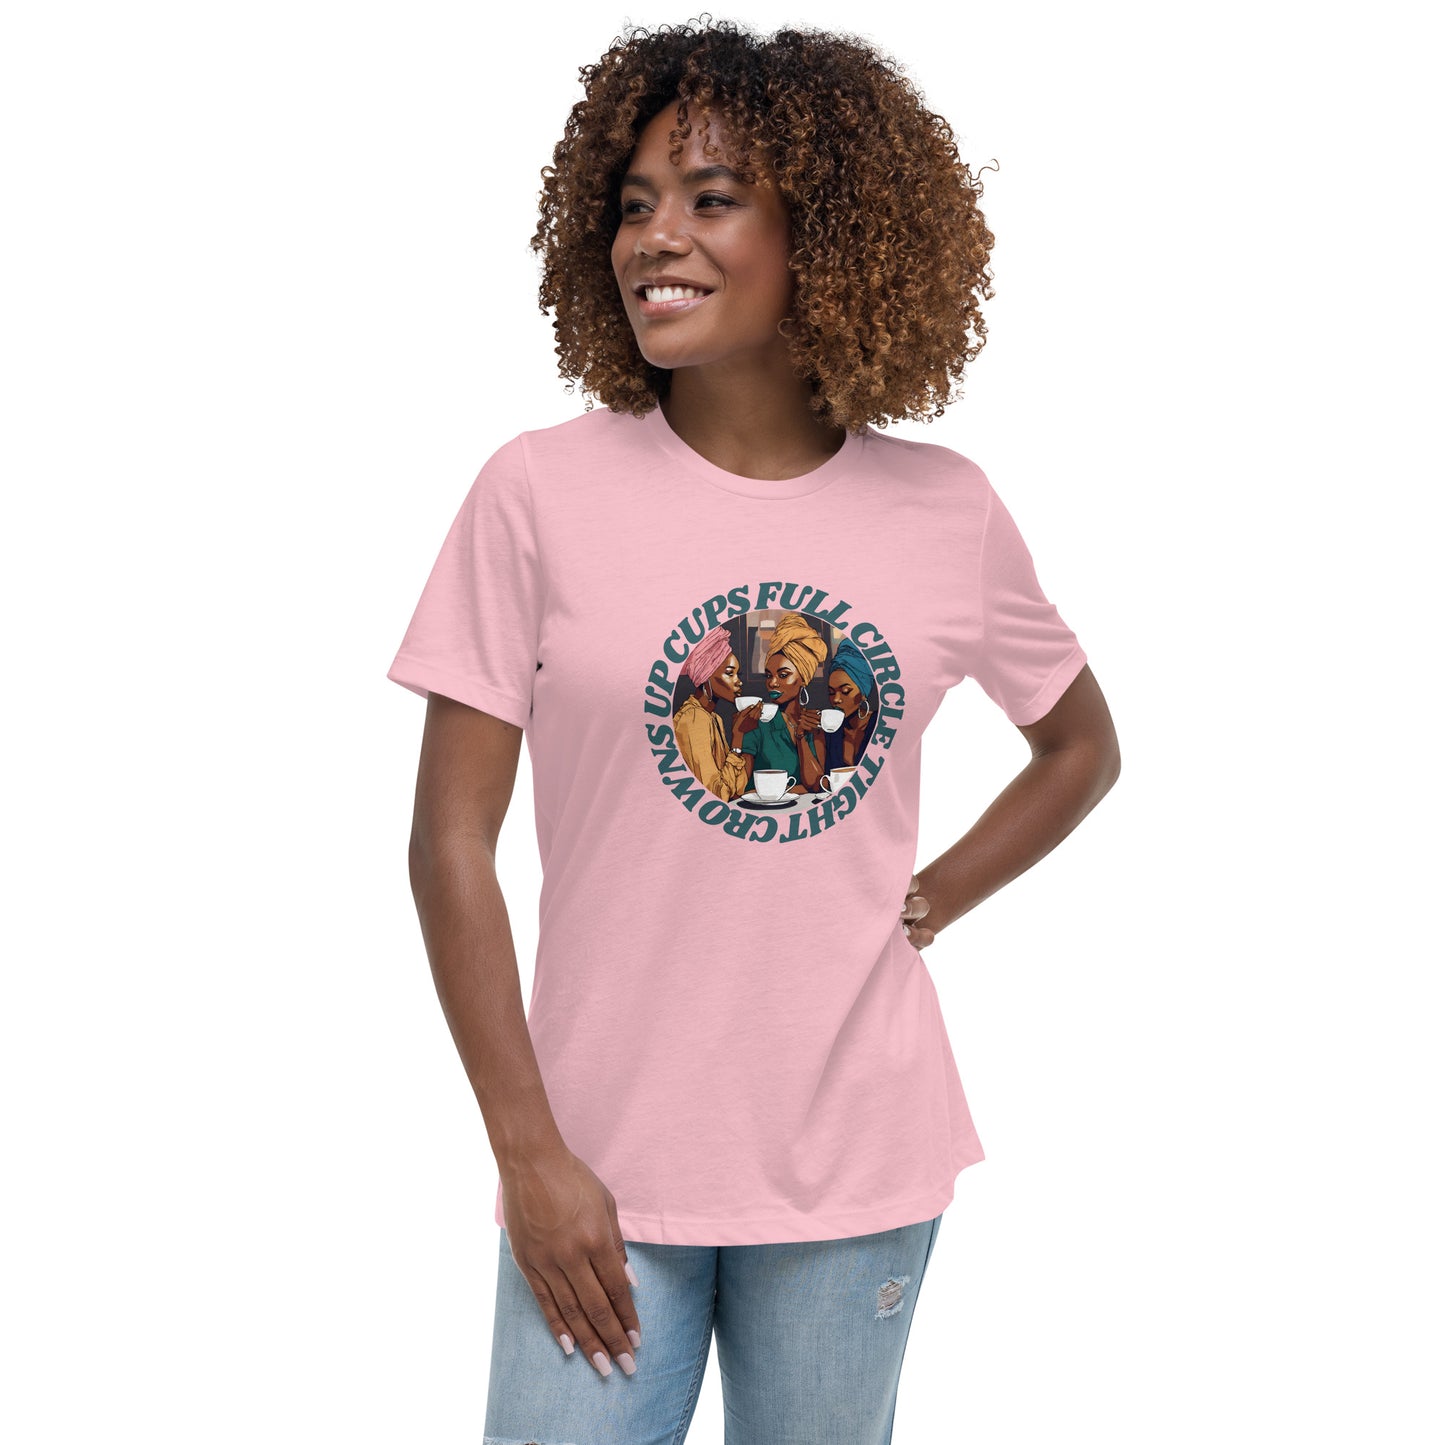 "Keeping my cup Full" (National HeadWrap Day Tee)